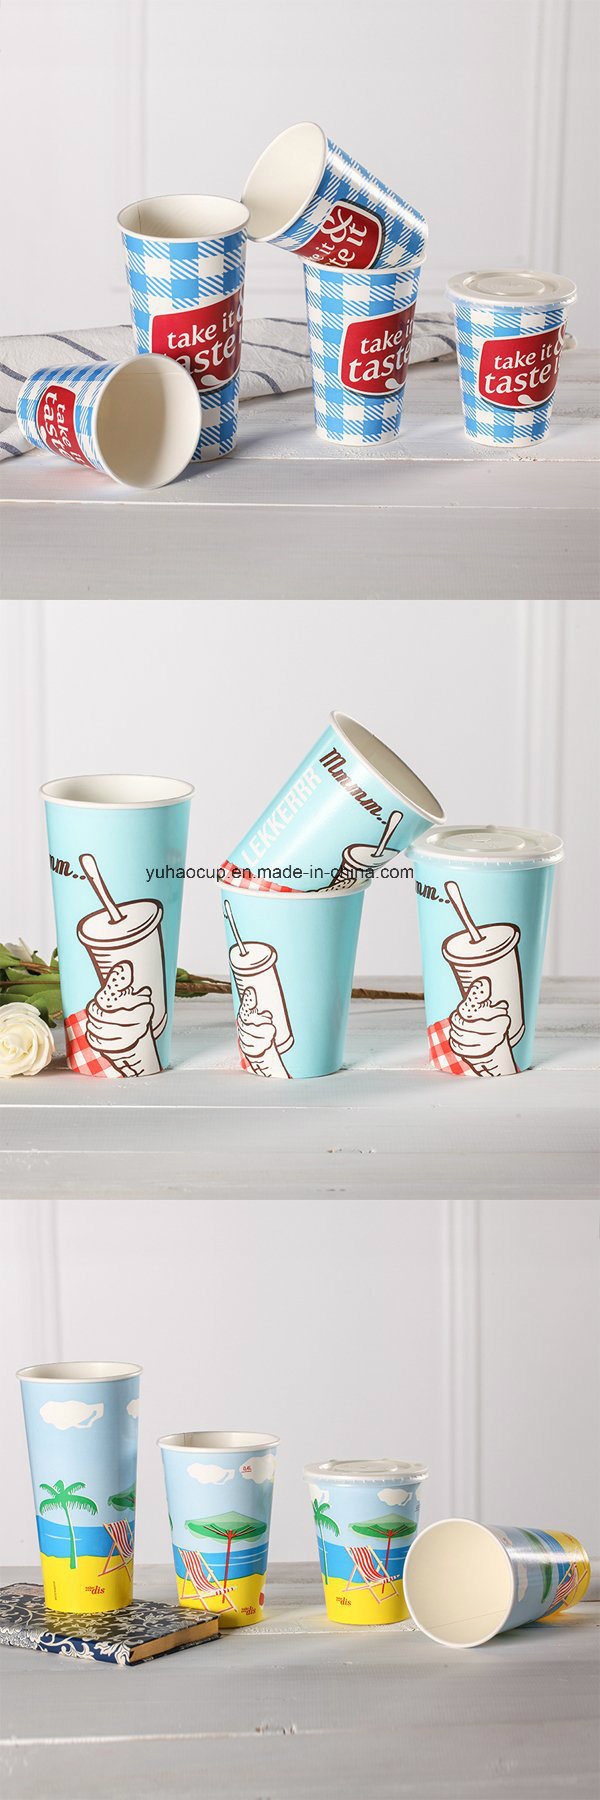 12oz Single Wall Cold Drink Paper Cup with Lid